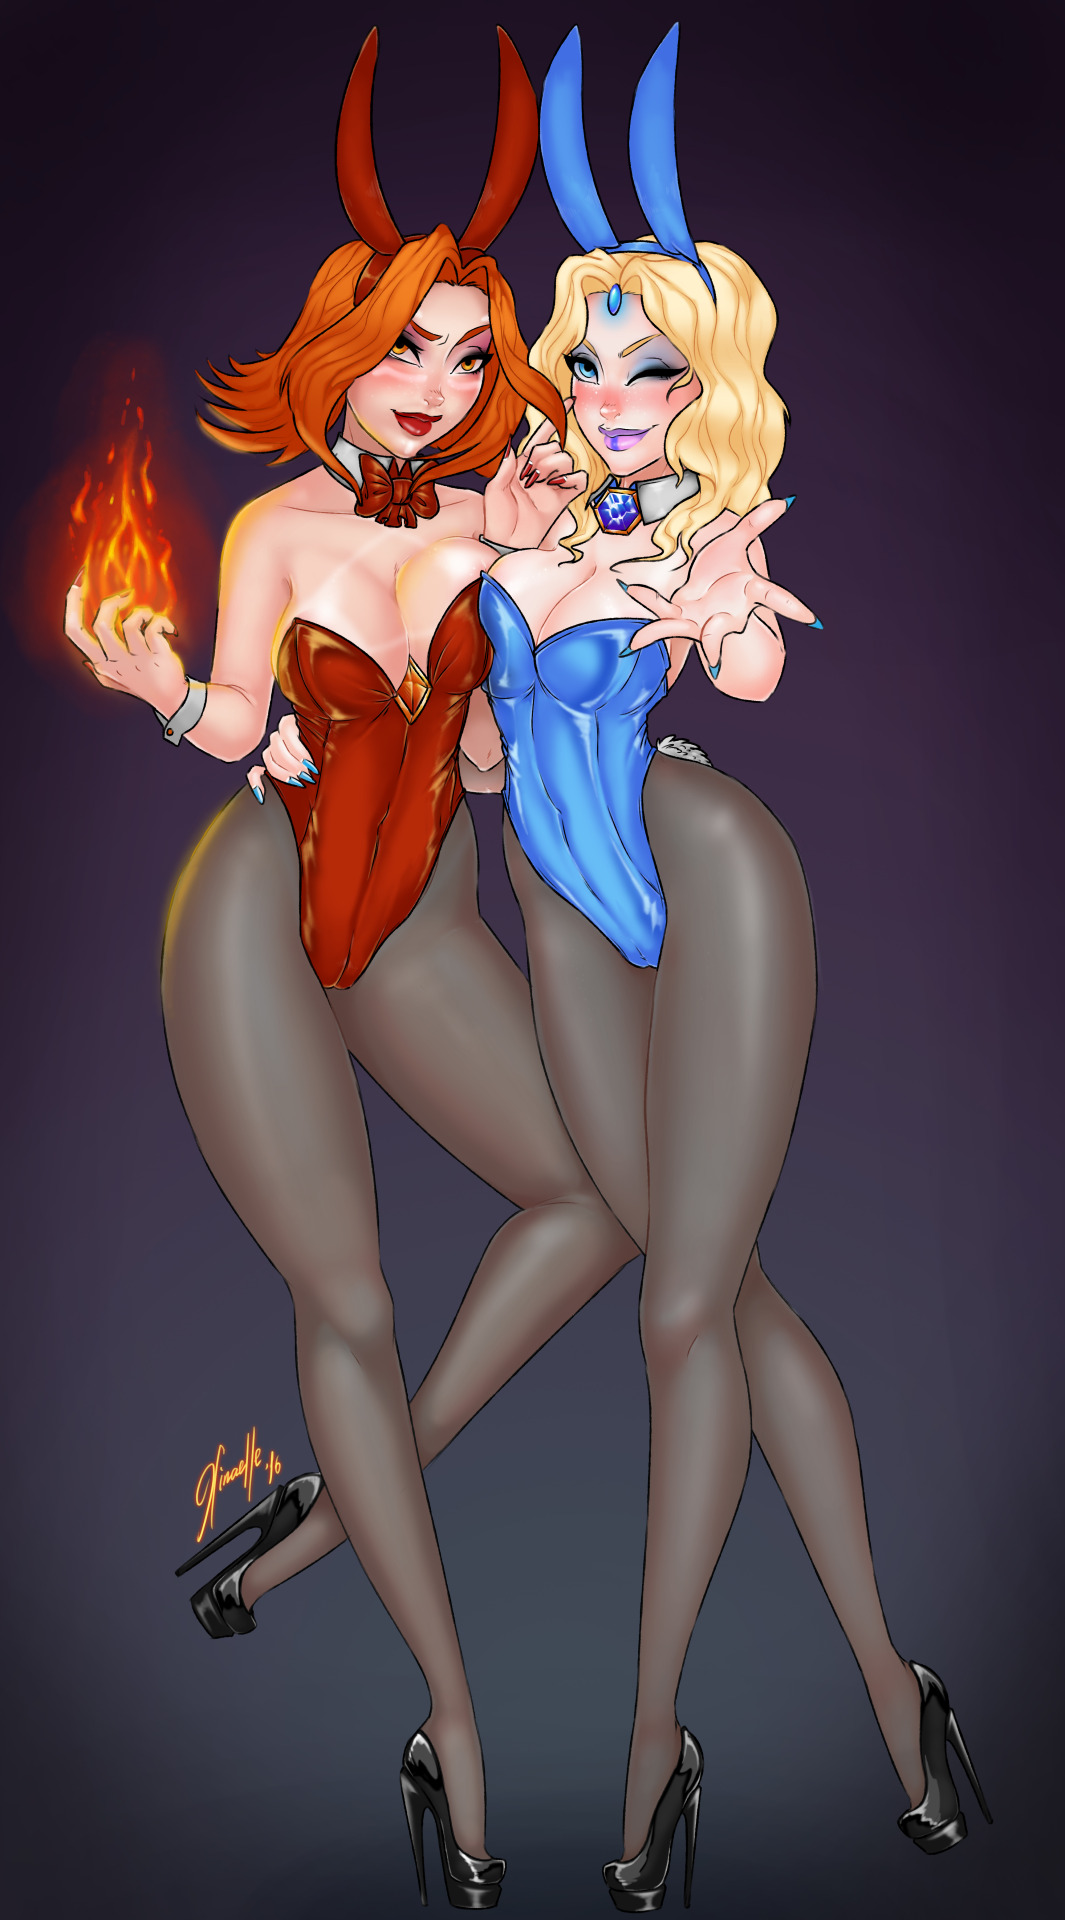 xinaelle-sfw:  Lovely Lina and Rylai ^3^   SFW versions &lt;3